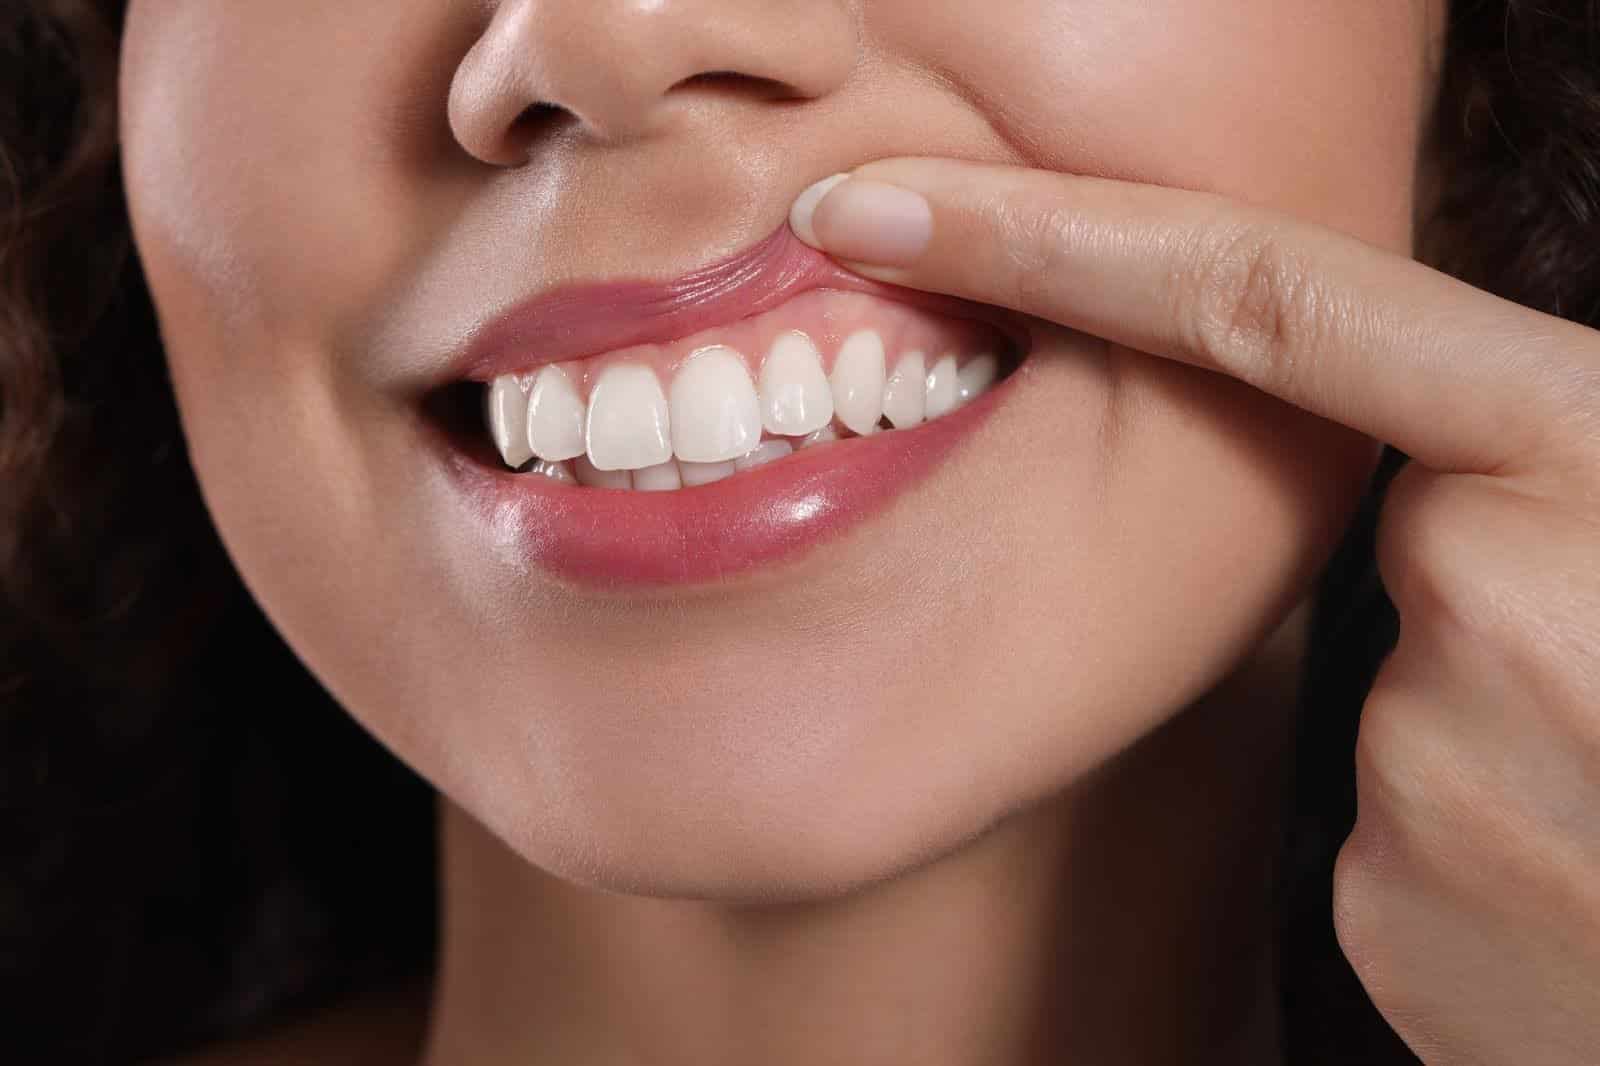 Young woman showing healthy gums, a result of her good oral health